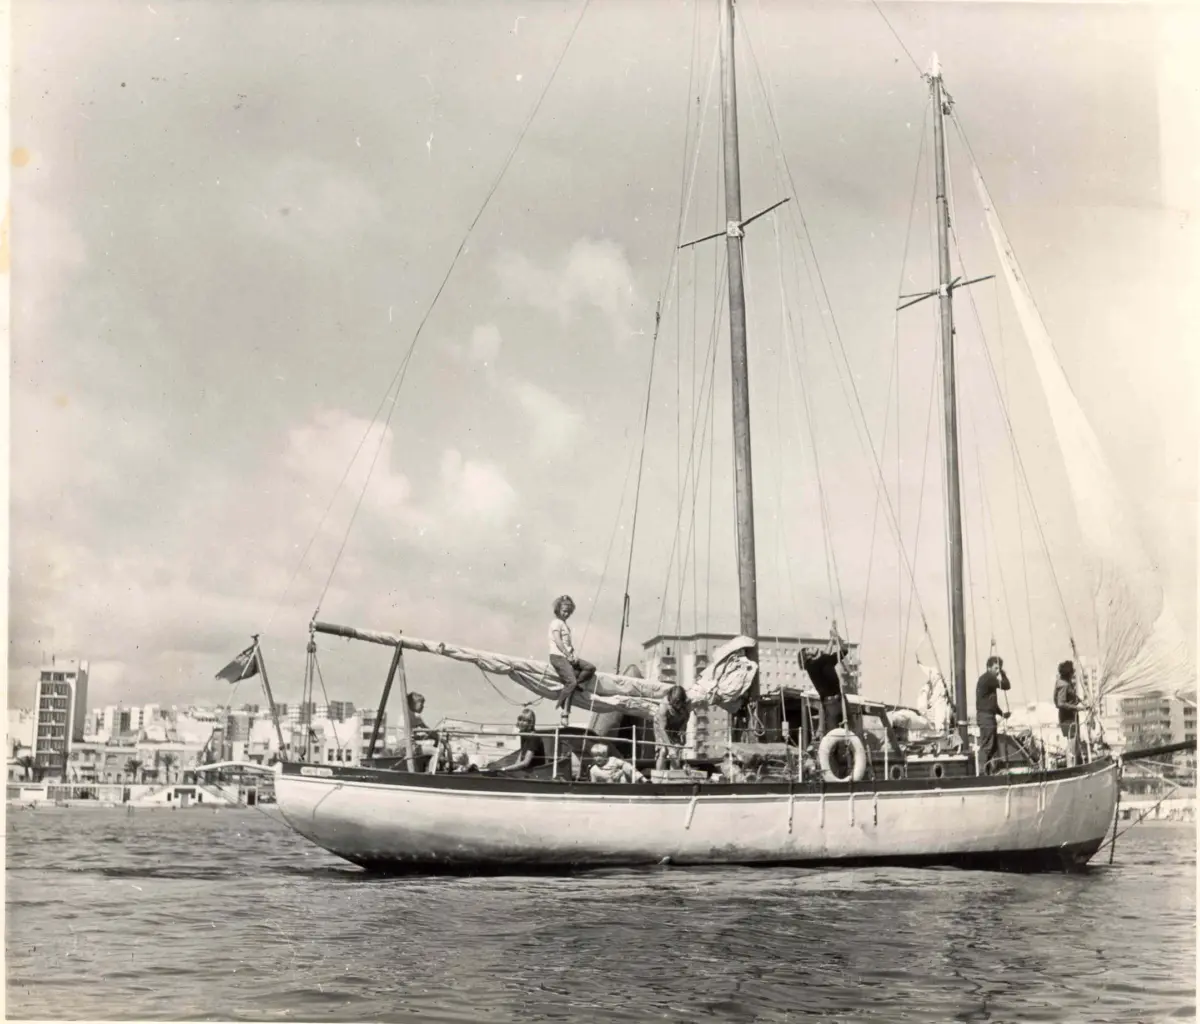 The Robertson family on their yacht named Lucette. (Courtesy of The Robertson Family Archive)